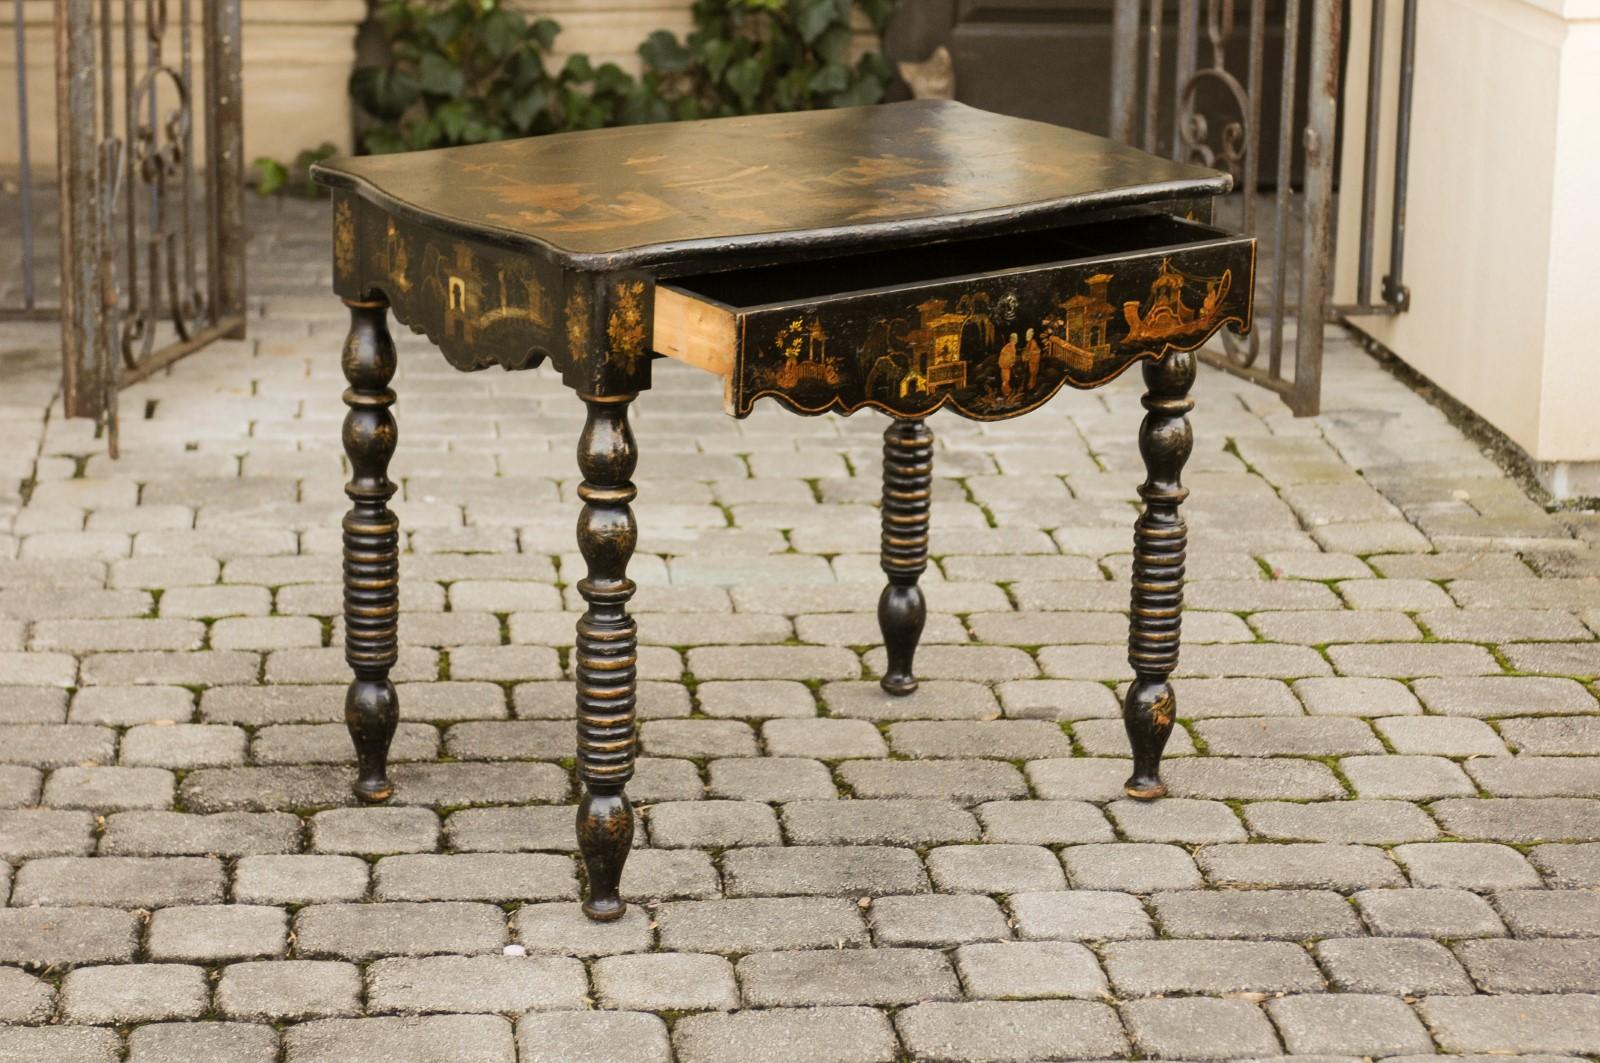 English 1850s Chinoiserie Table with Ebonized Wood and Hand Painted Décor 8